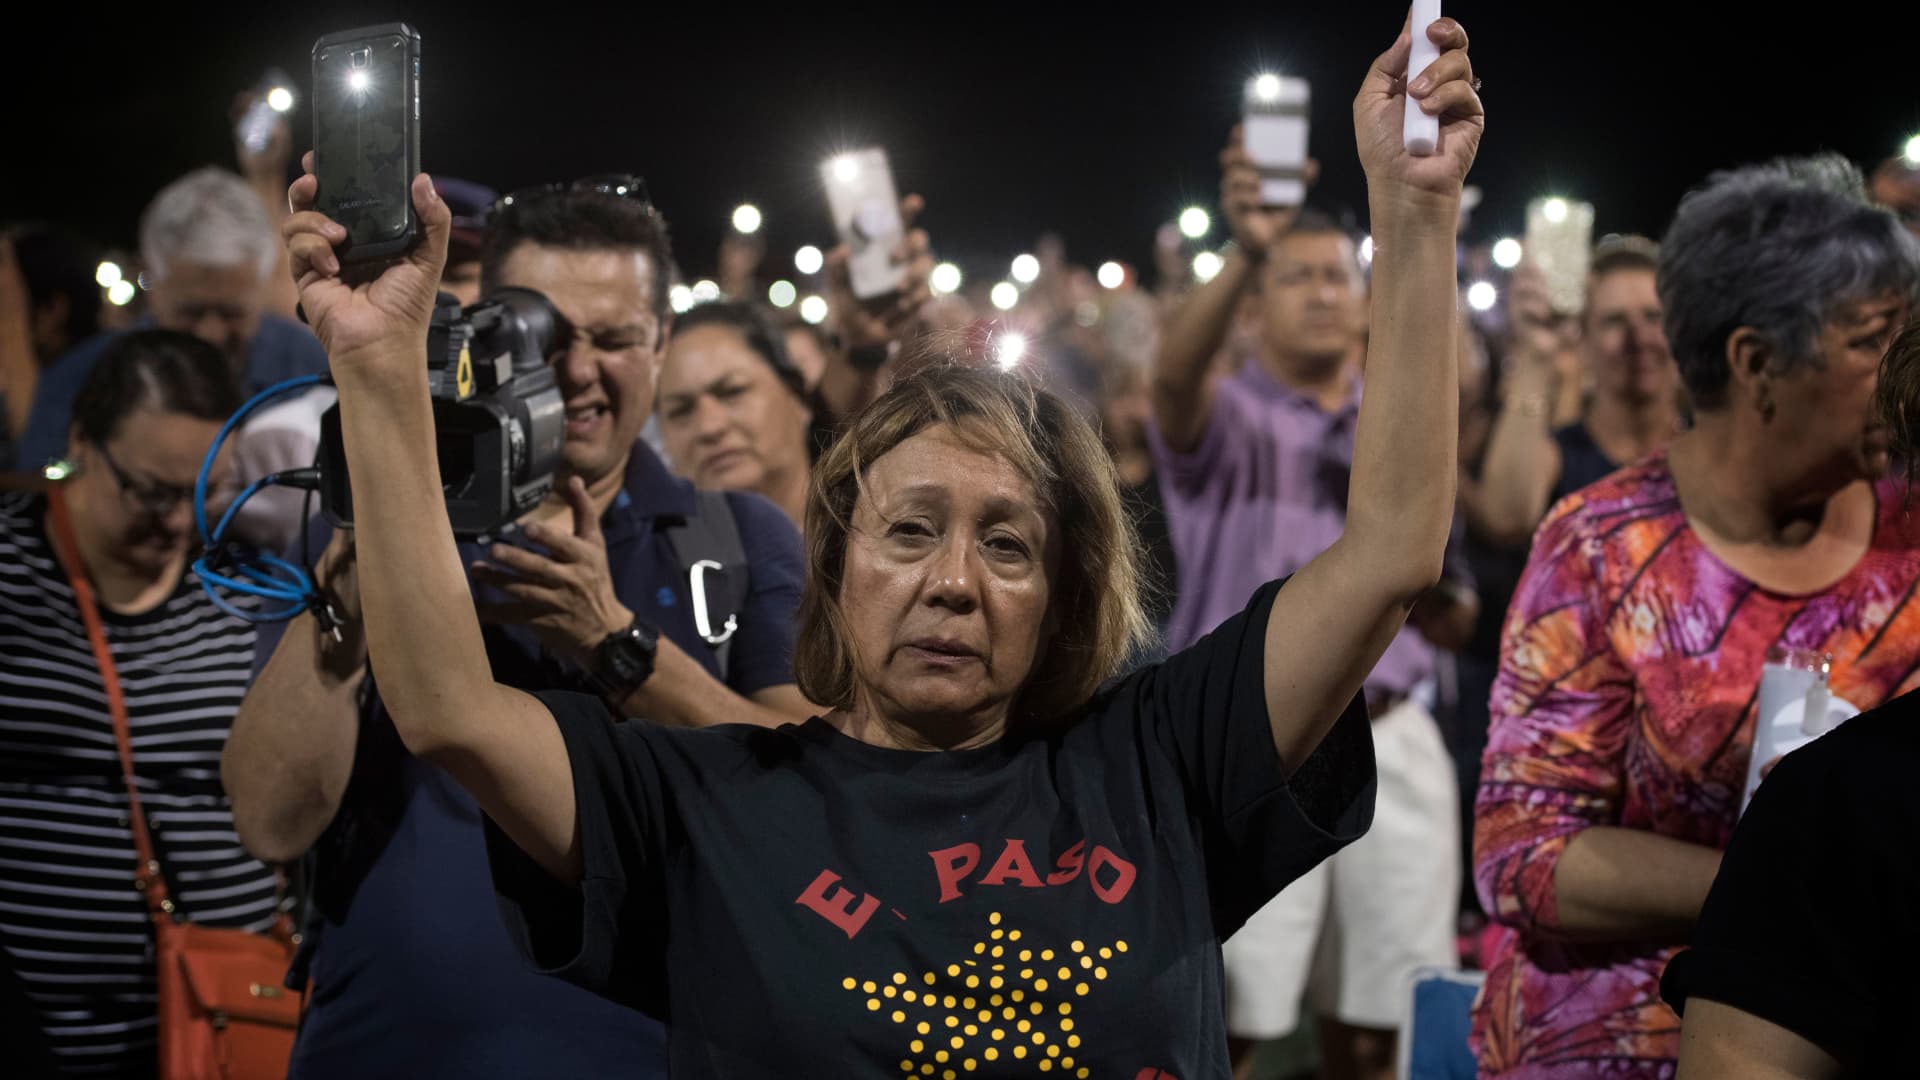 People react during a prayer vigil organized by the city, after a shooting left 20 people dead at the Cielo Vista Mall Wal-Mart in El Paso, Texas, on August 4, 2019. - The United States mourned Sunday for victims of two mass shootings that killed 29 people in less than 24 hours as debate raged over whether President Donald Trump's rhetoric was partly to blame for surging gun violence.